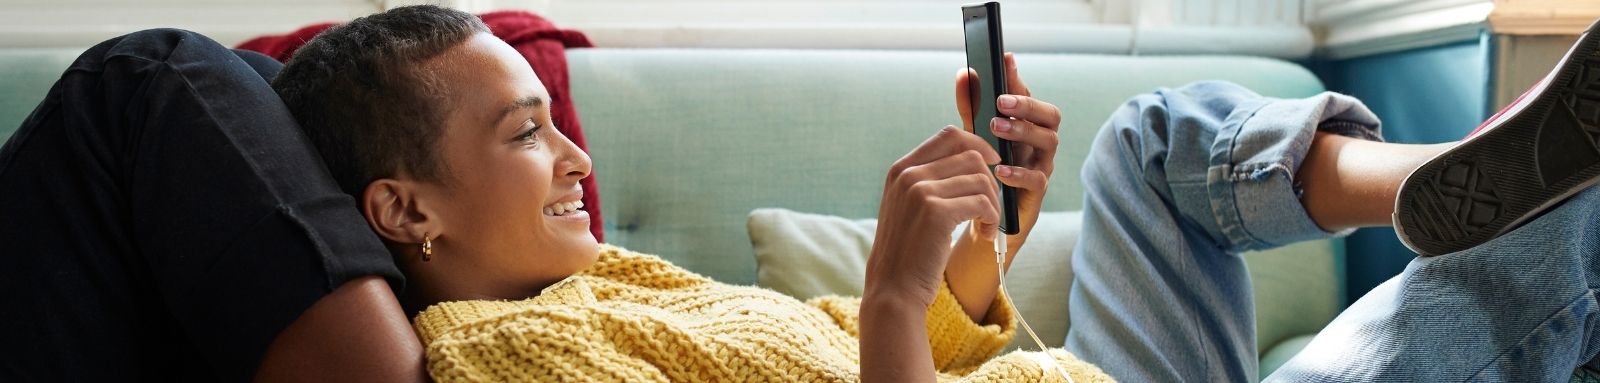 Girl in her 20s holding a mobile phone on the couch